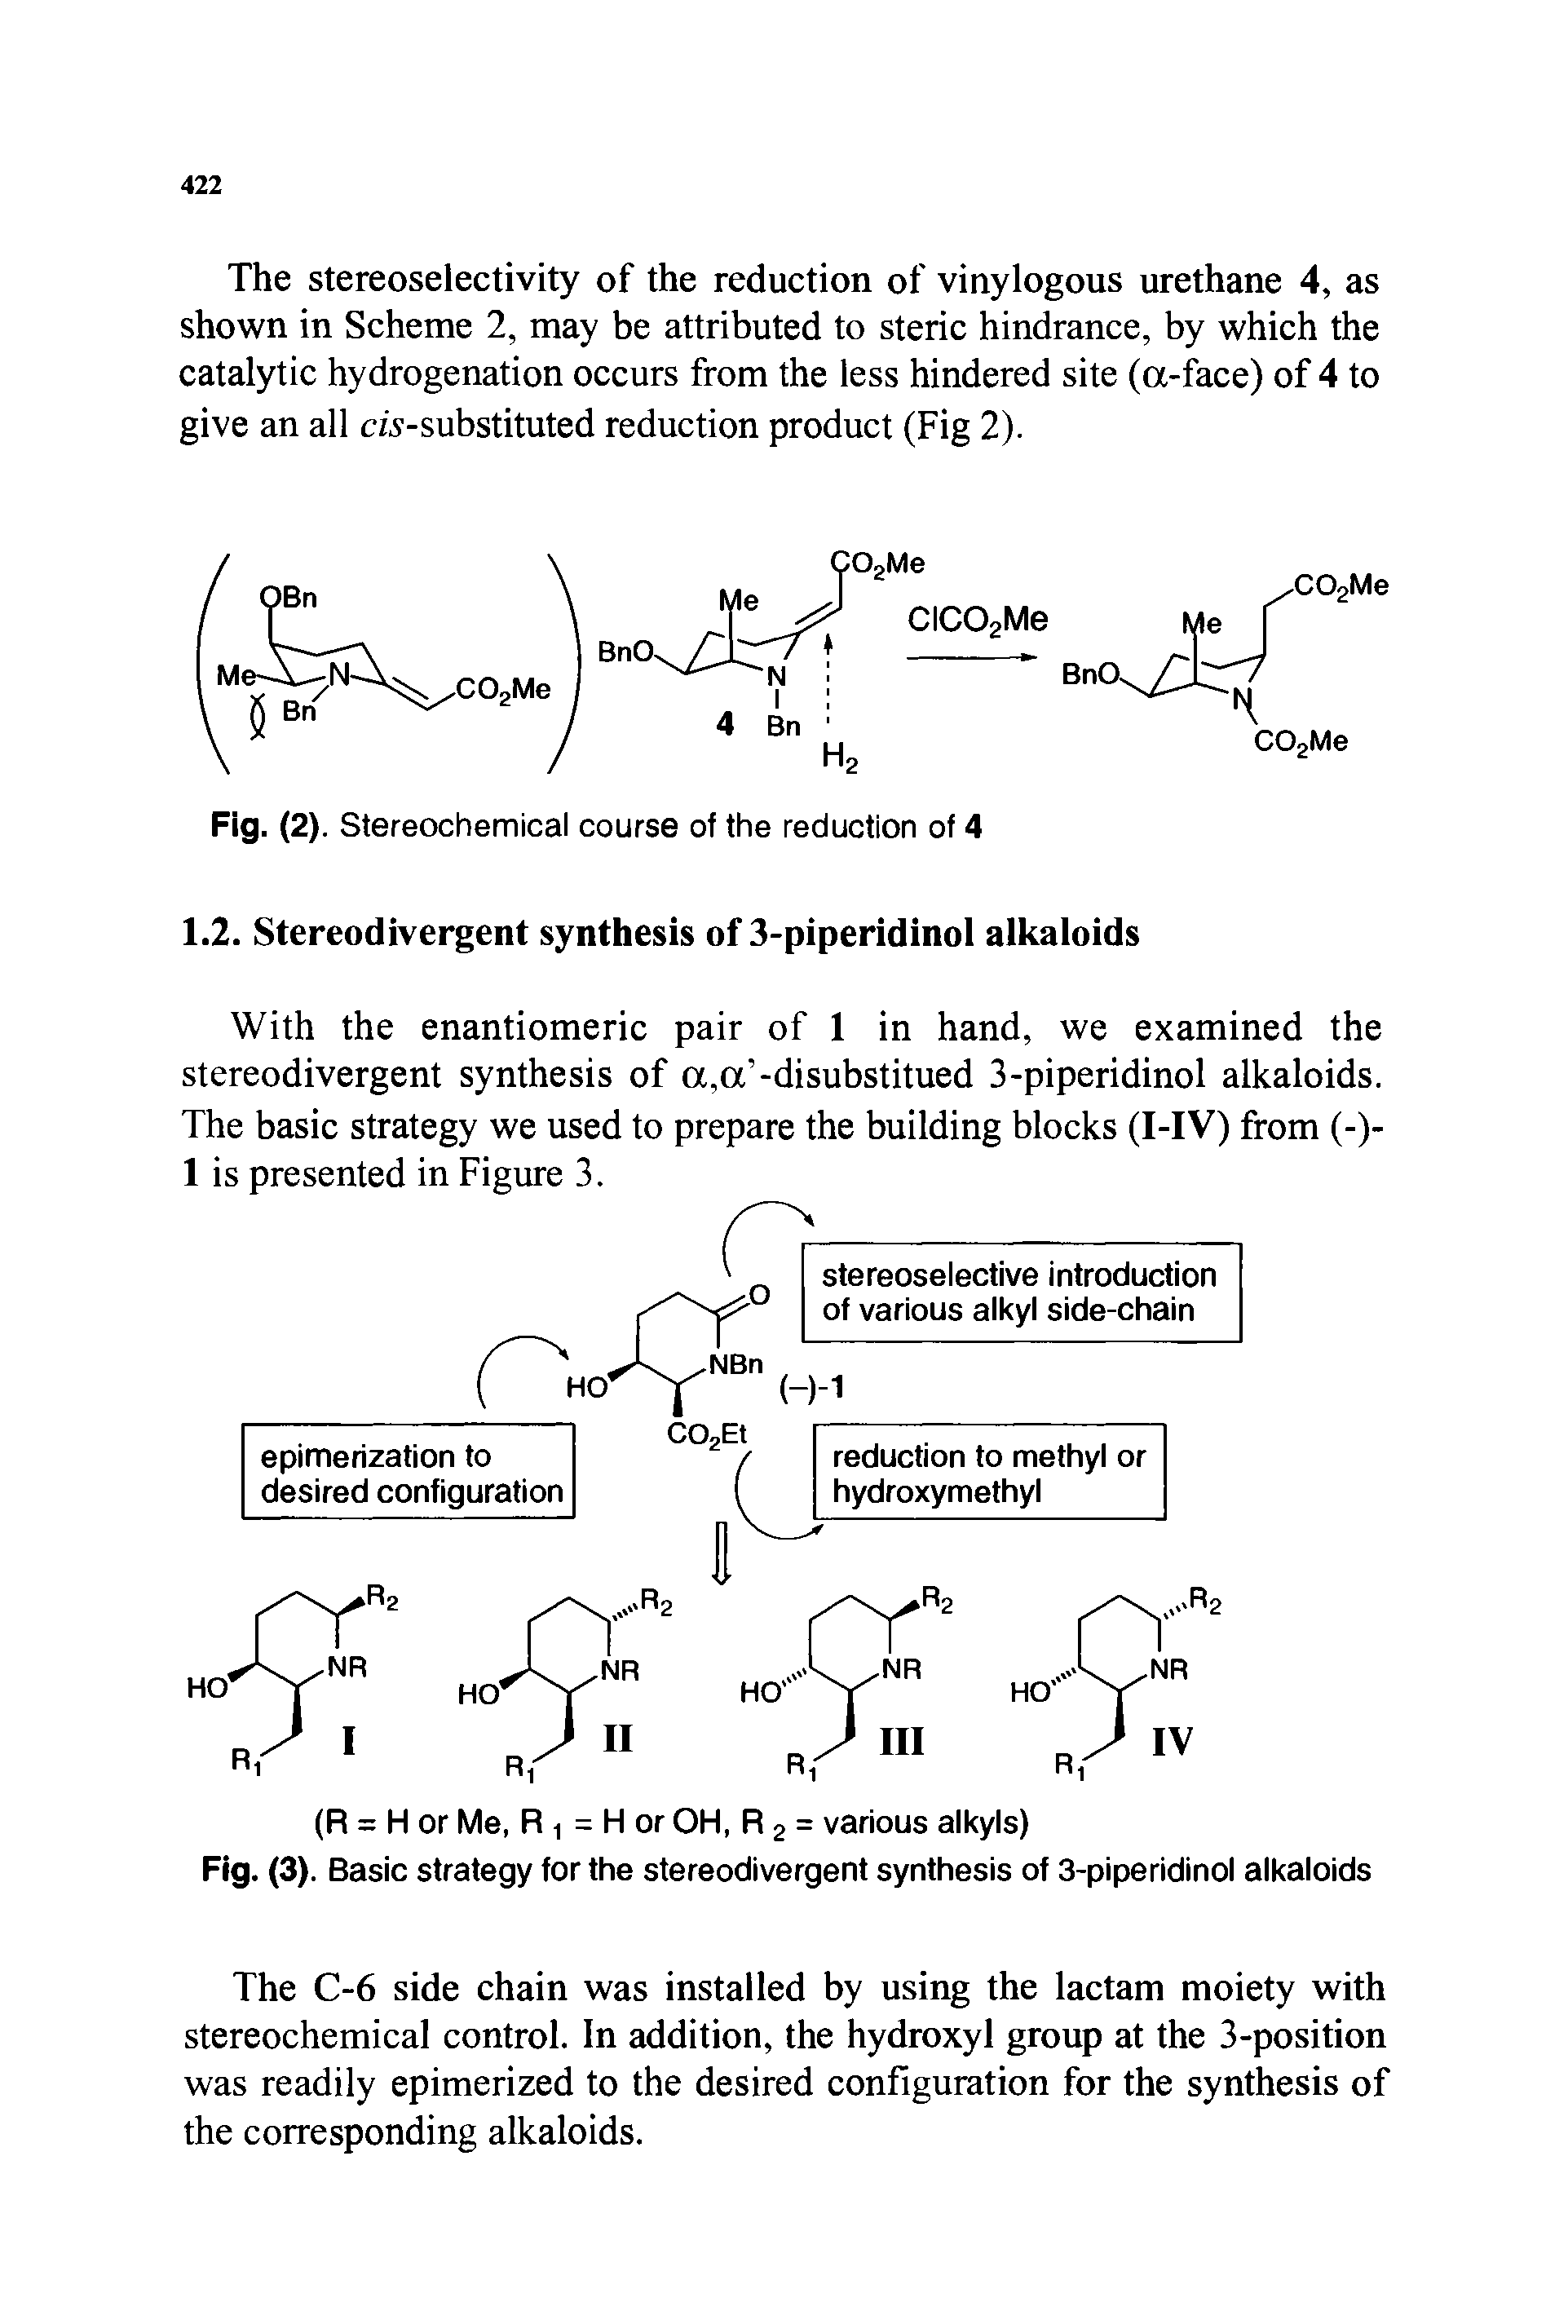 Fig. (3). Basic strategy for the stereodivergent synthesis of 3-piperidinol alkaloids...